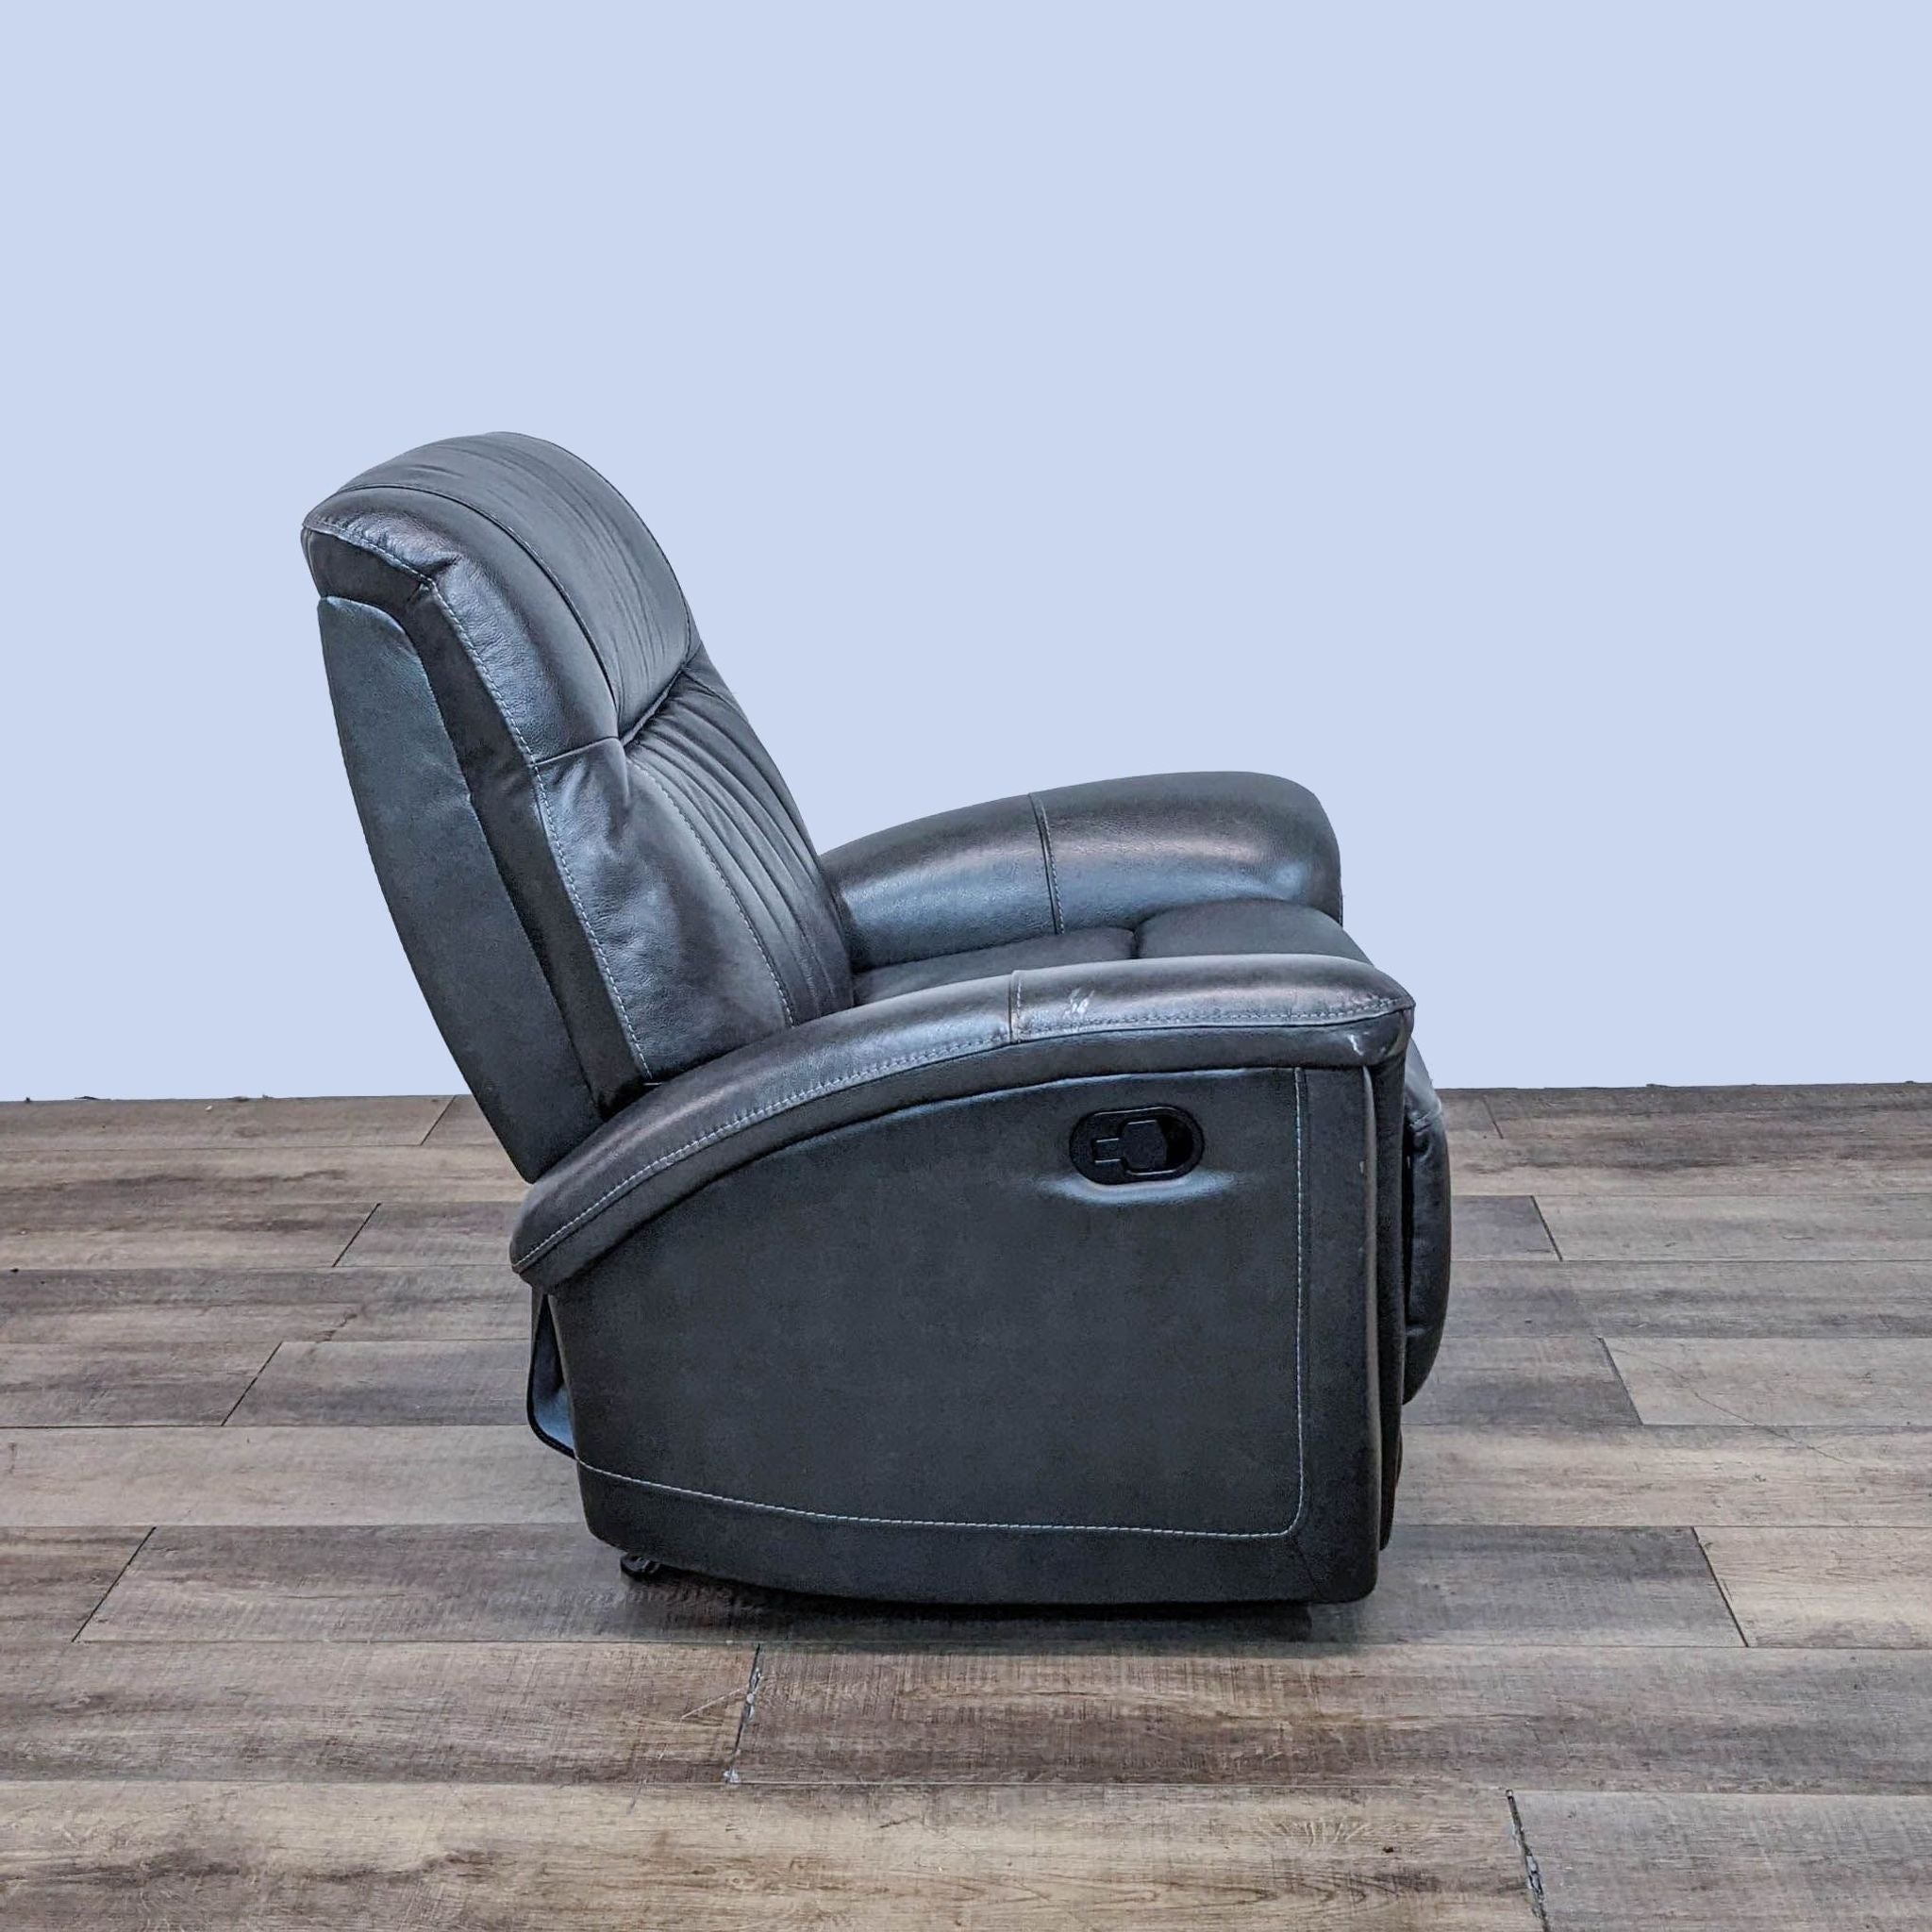 Rear view of Home Meridian leather recliner showing vertical stitching and compact design, hardwood floor background.